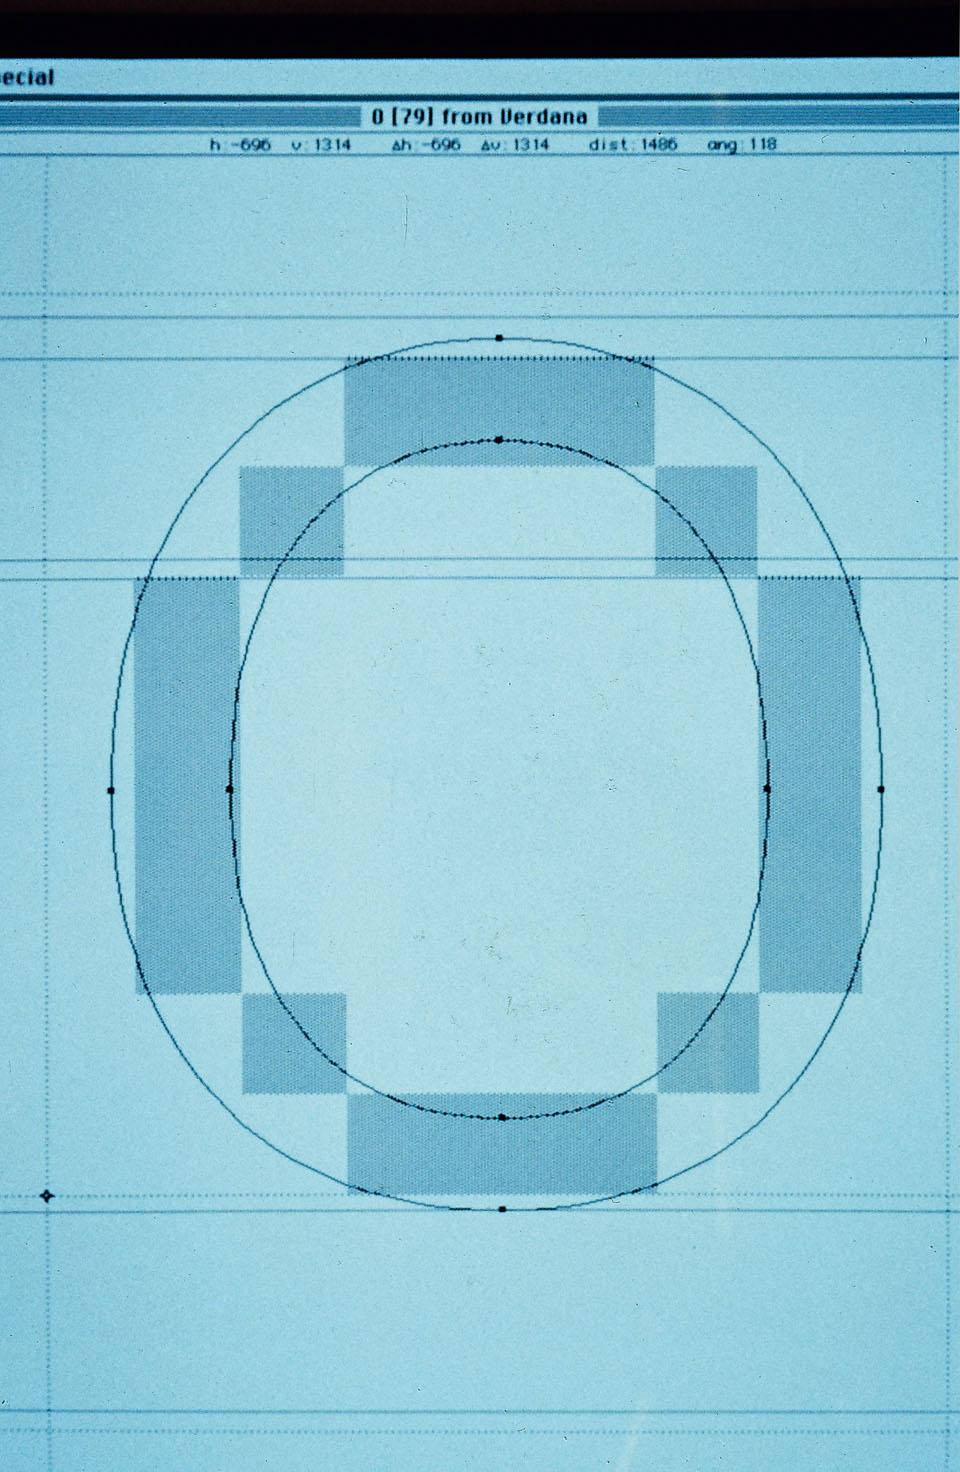 Screenshot of the letter O in Matthew Carter’s Verdana: the digital computer outline is
superimposed on the bitmap.